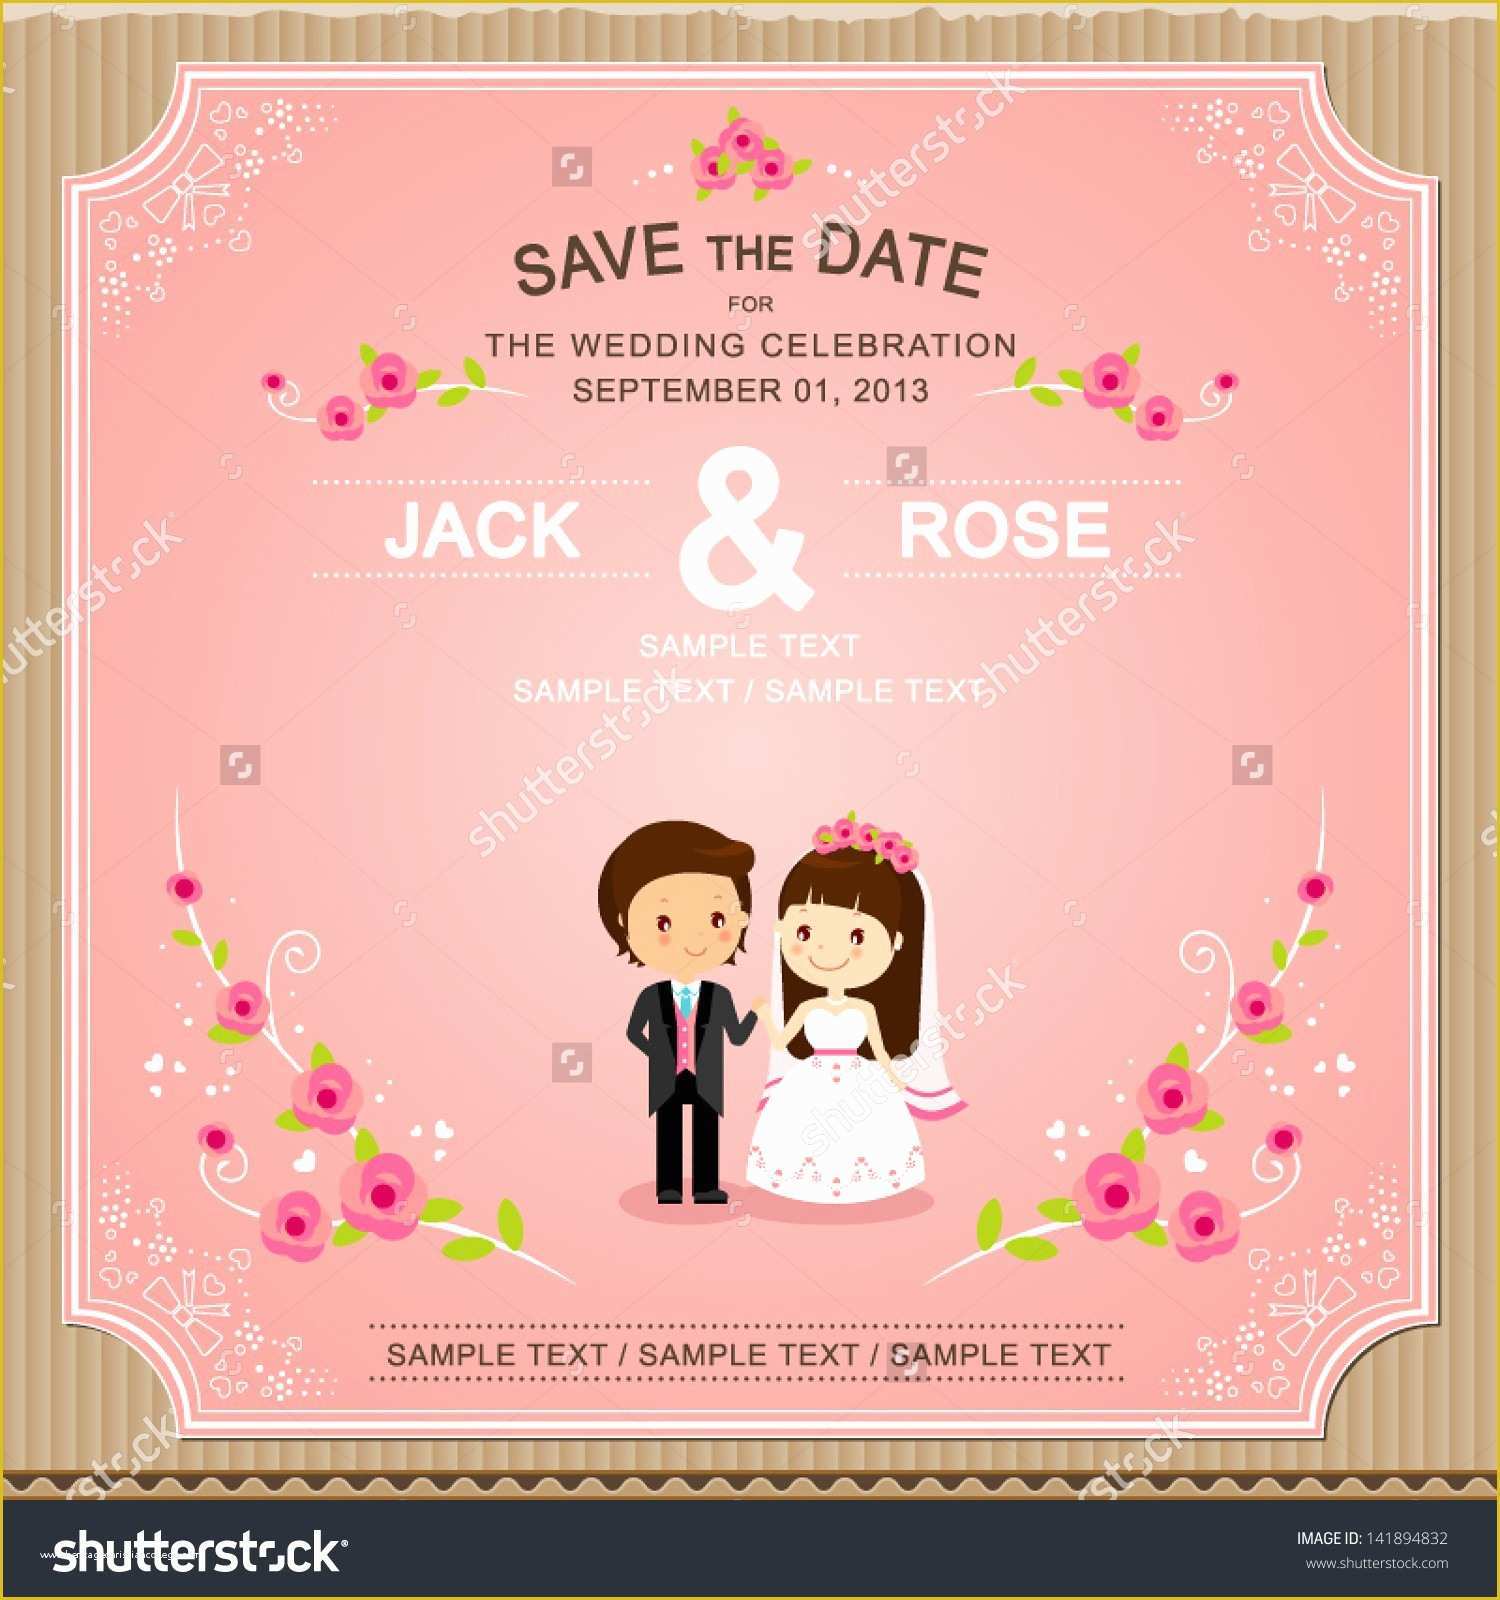 Engagement Invitation Templates Free Download Of Sample Wedding Invitation Cards In Powerpoint Best